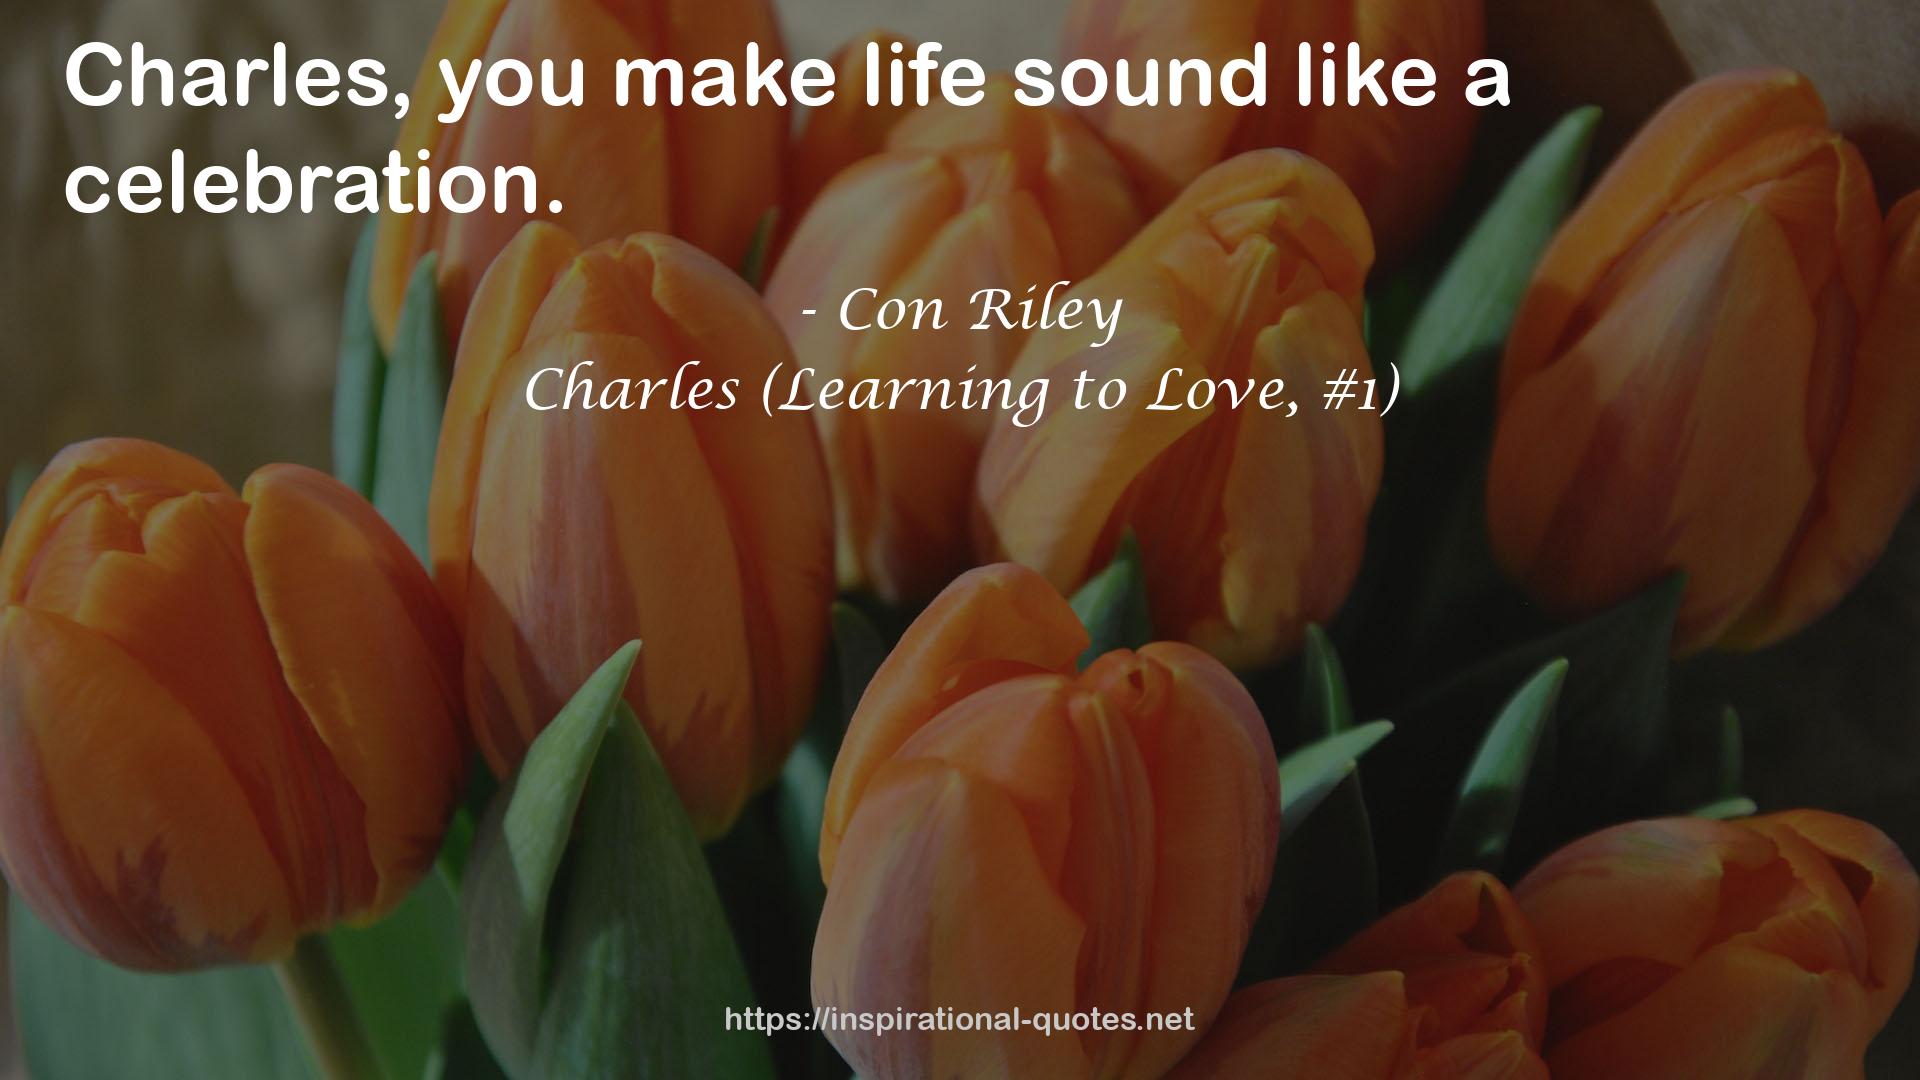 Charles (Learning to Love, #1) QUOTES